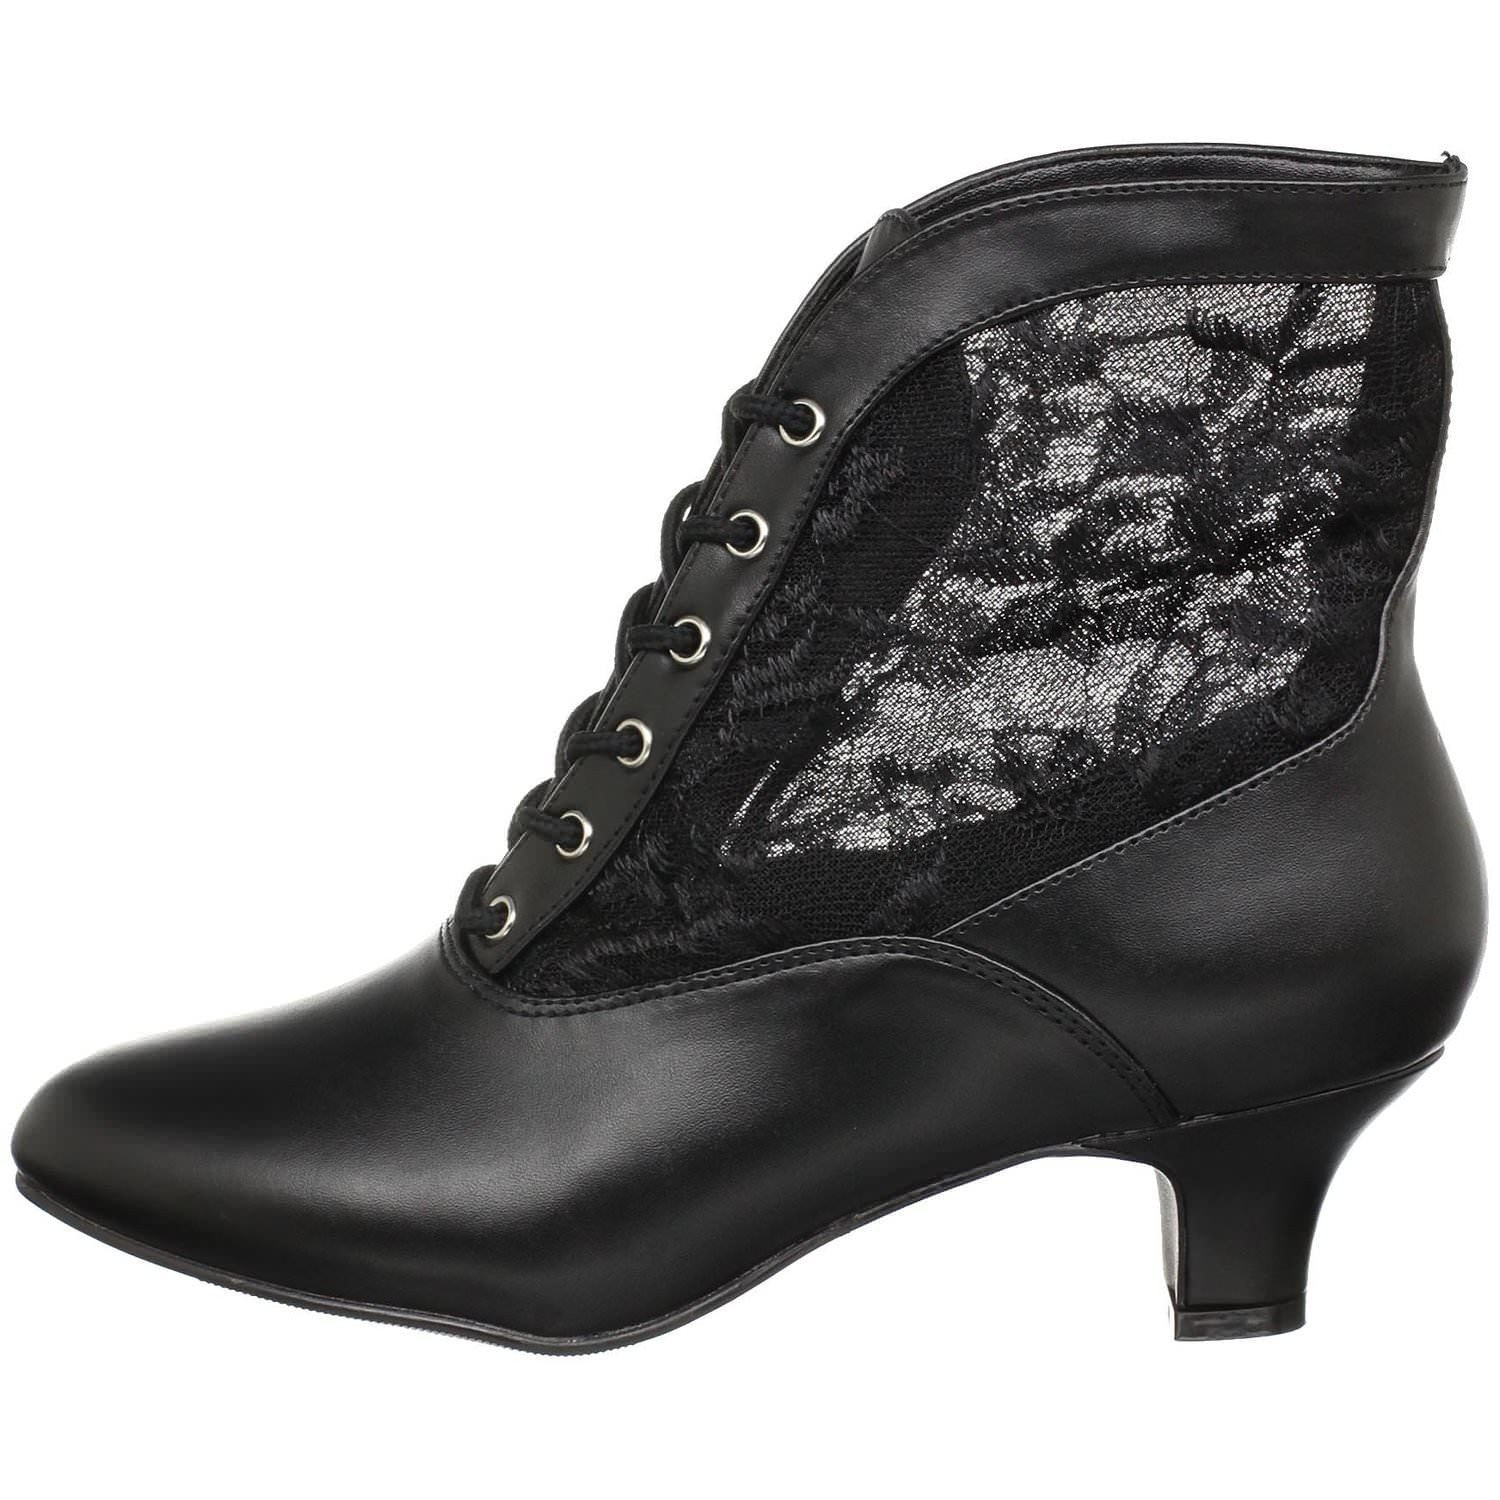 FUNTASMA DAME-05 Black Victorian Granny Boots With Lace Accent - Shoecup.com - 5